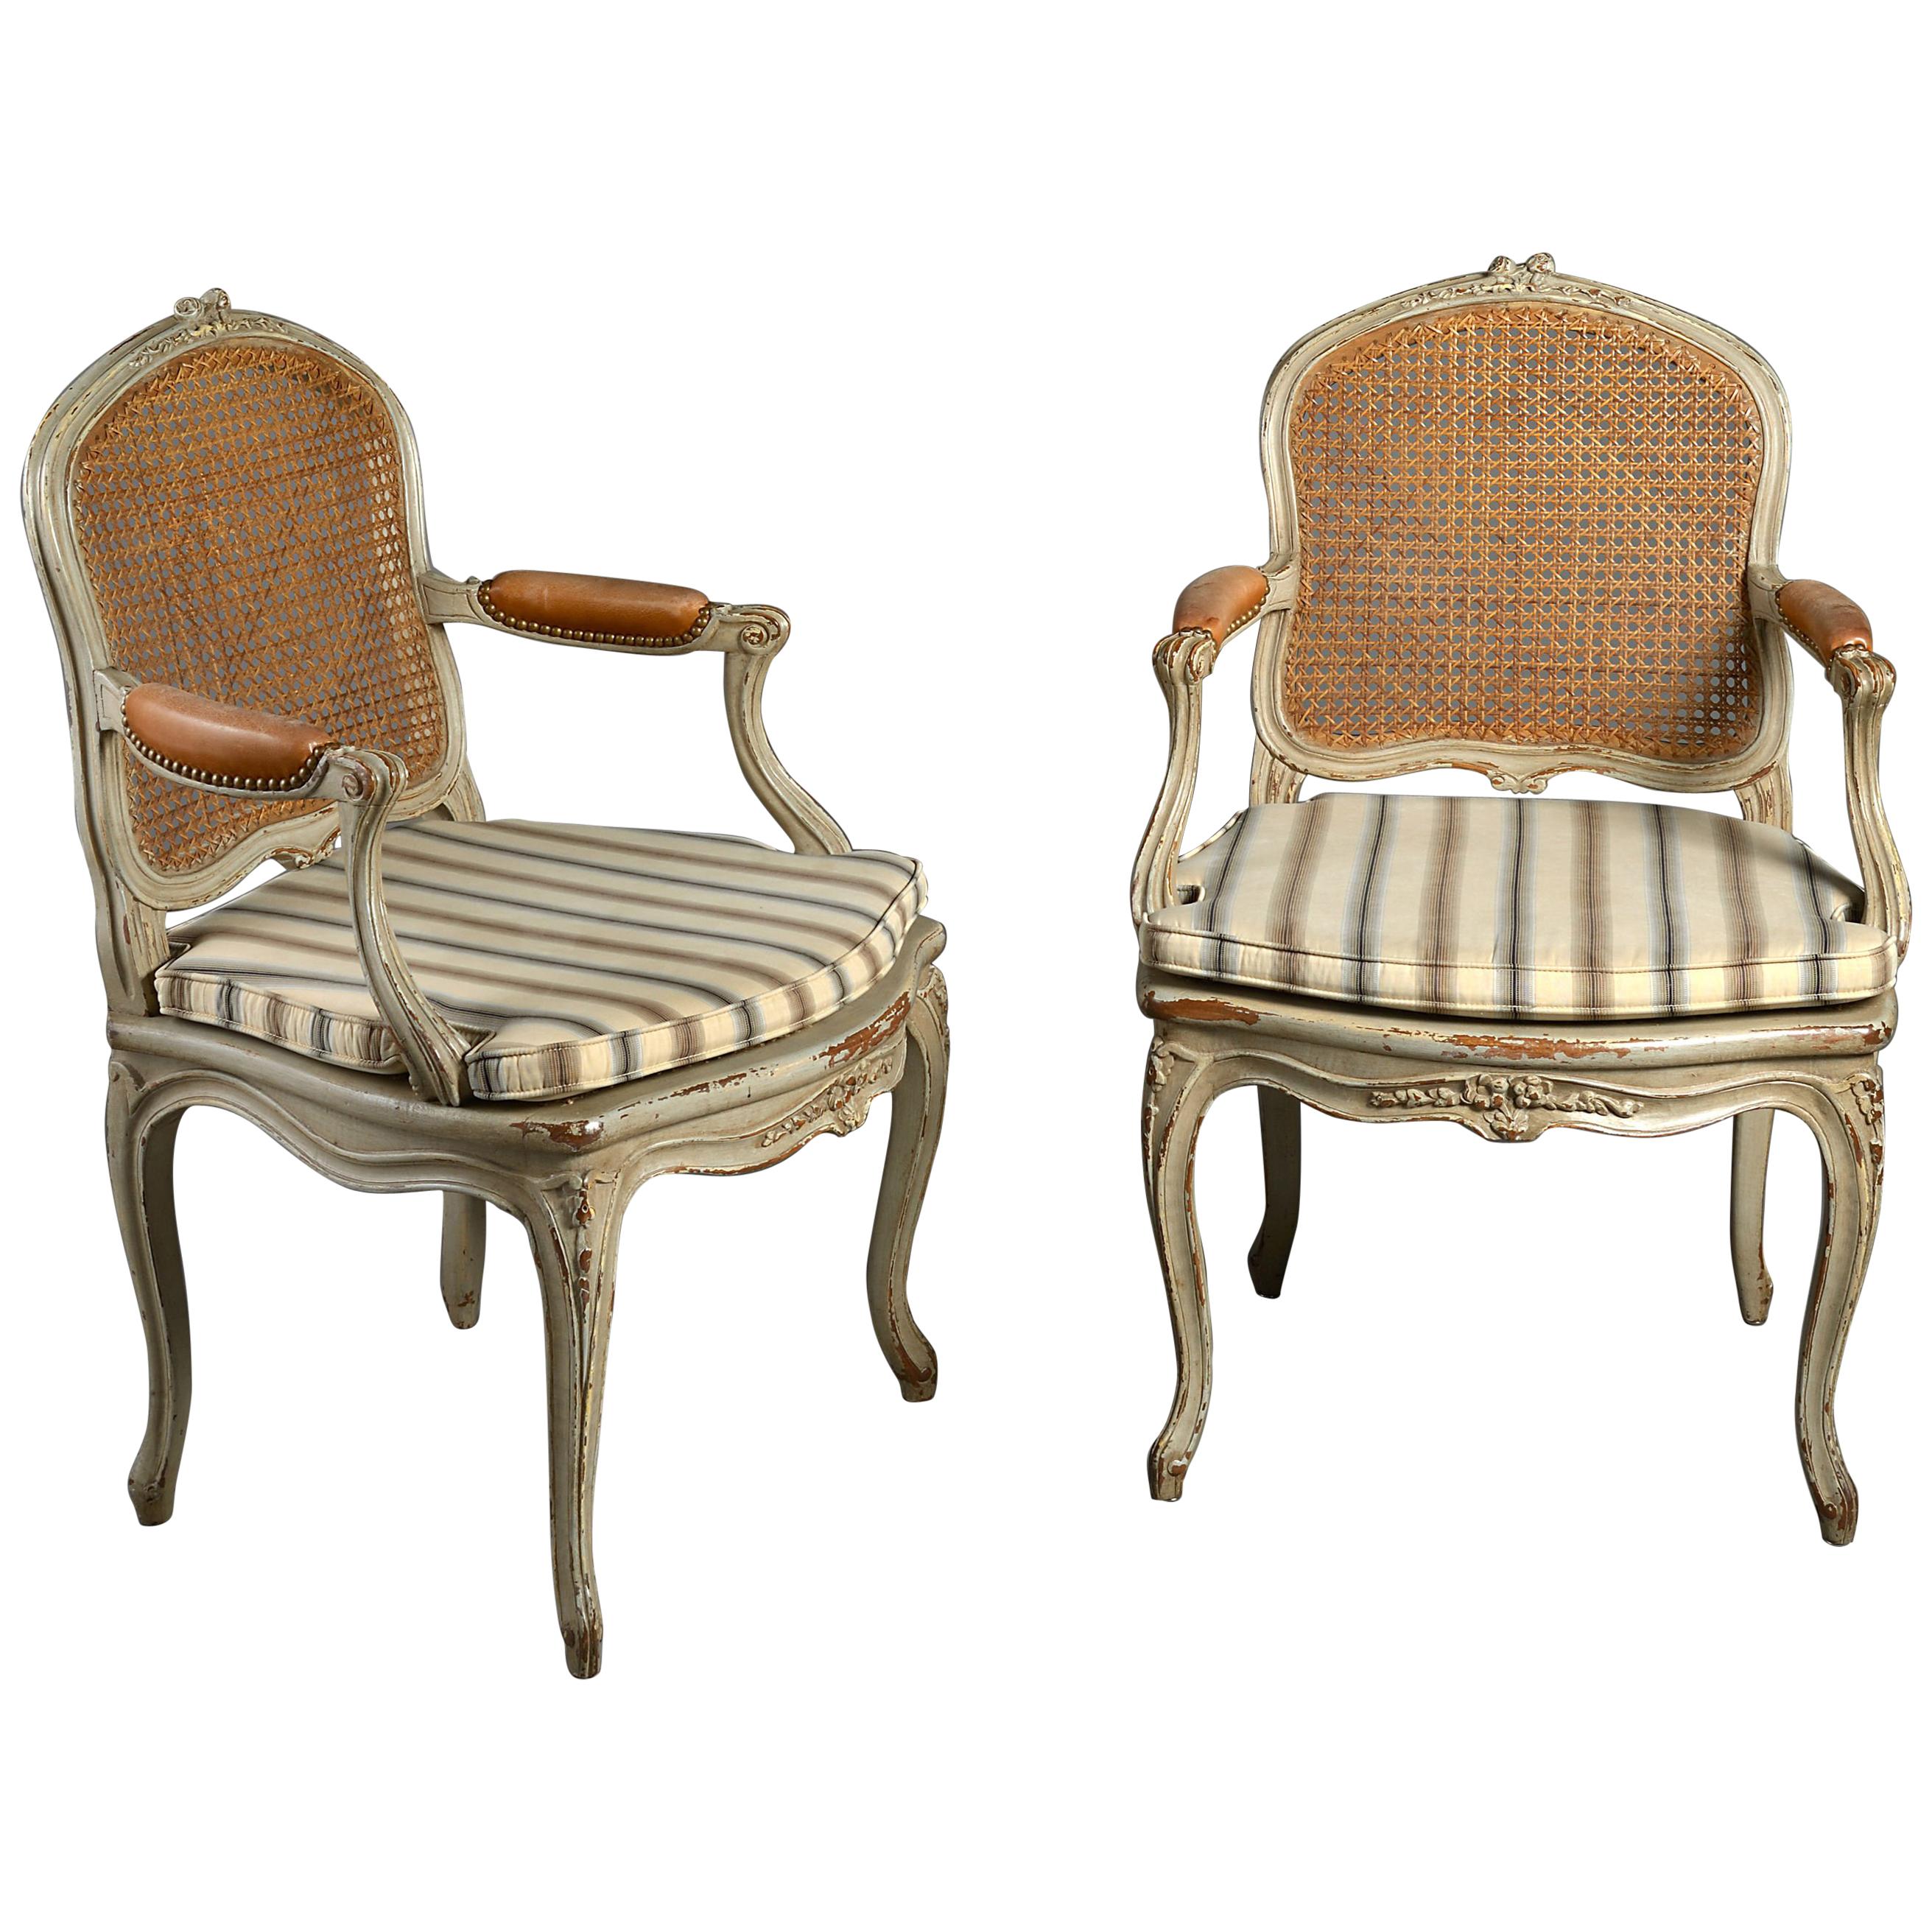 Pair of 19th Century Rococo Revival Armchairs in the Louis XV Taste